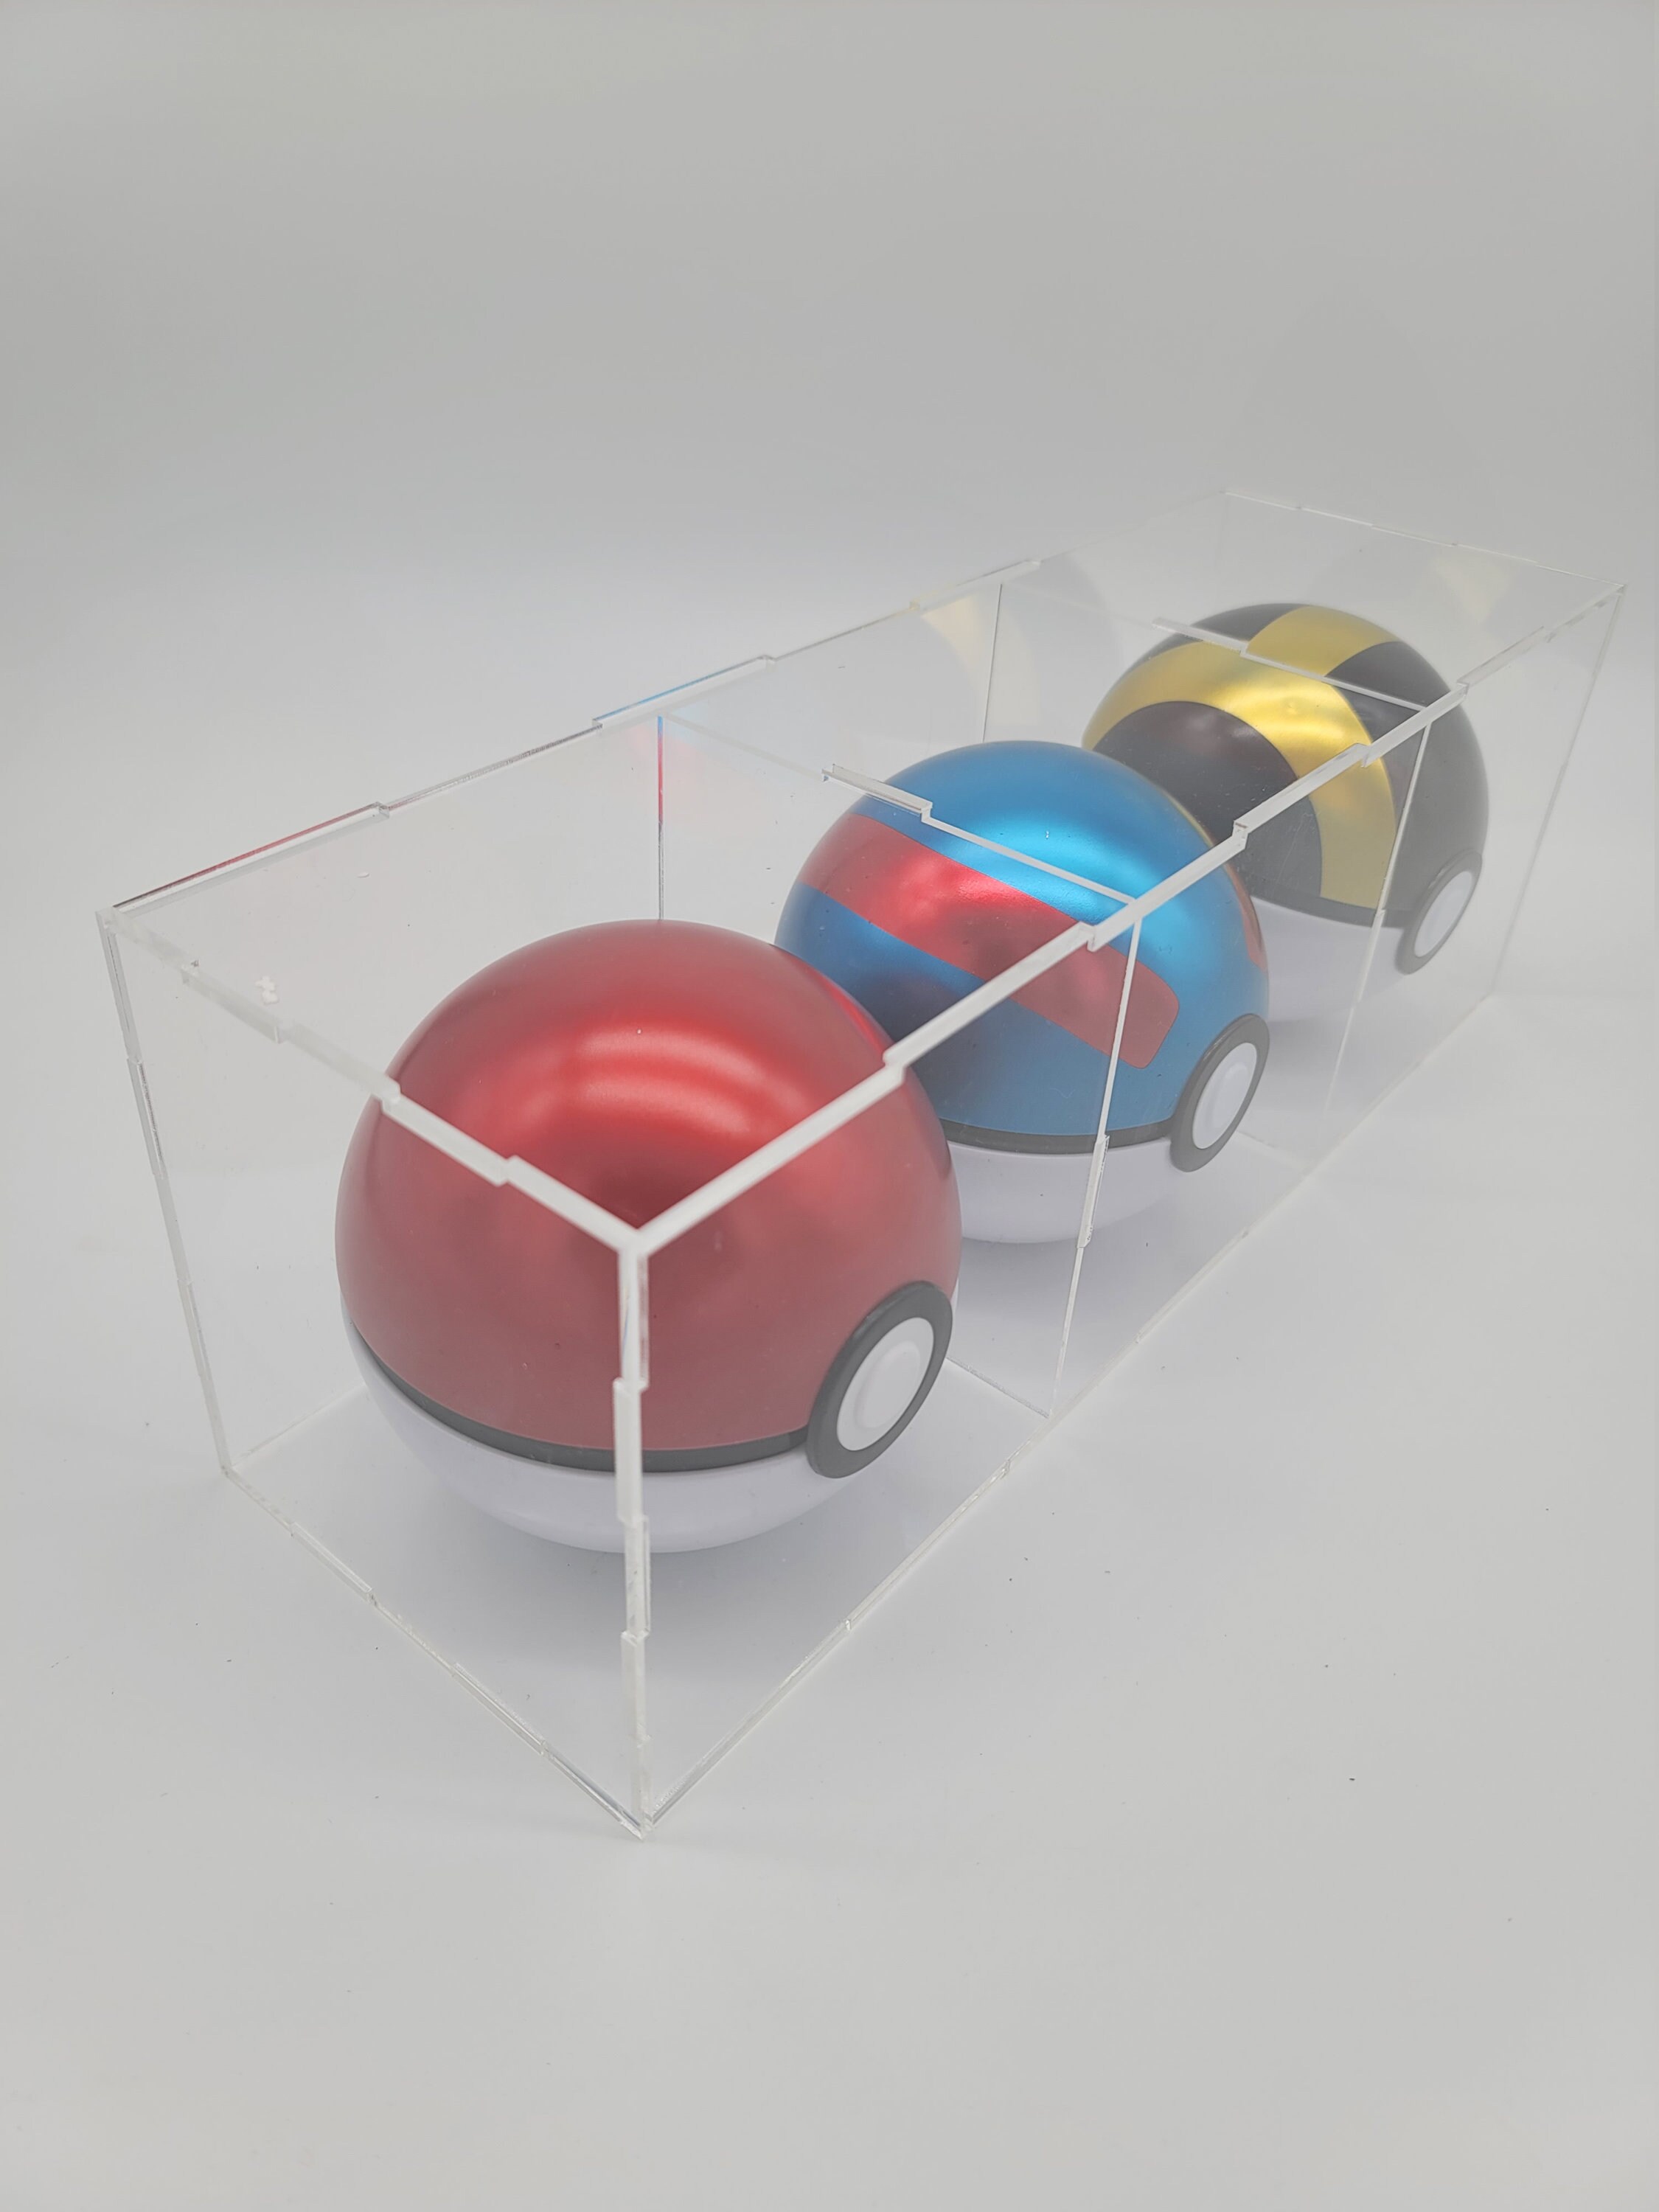 Framing/Display Quality Grade Details about   Pokemon Pokeball 3 Pack Acrylic Display Case Box 